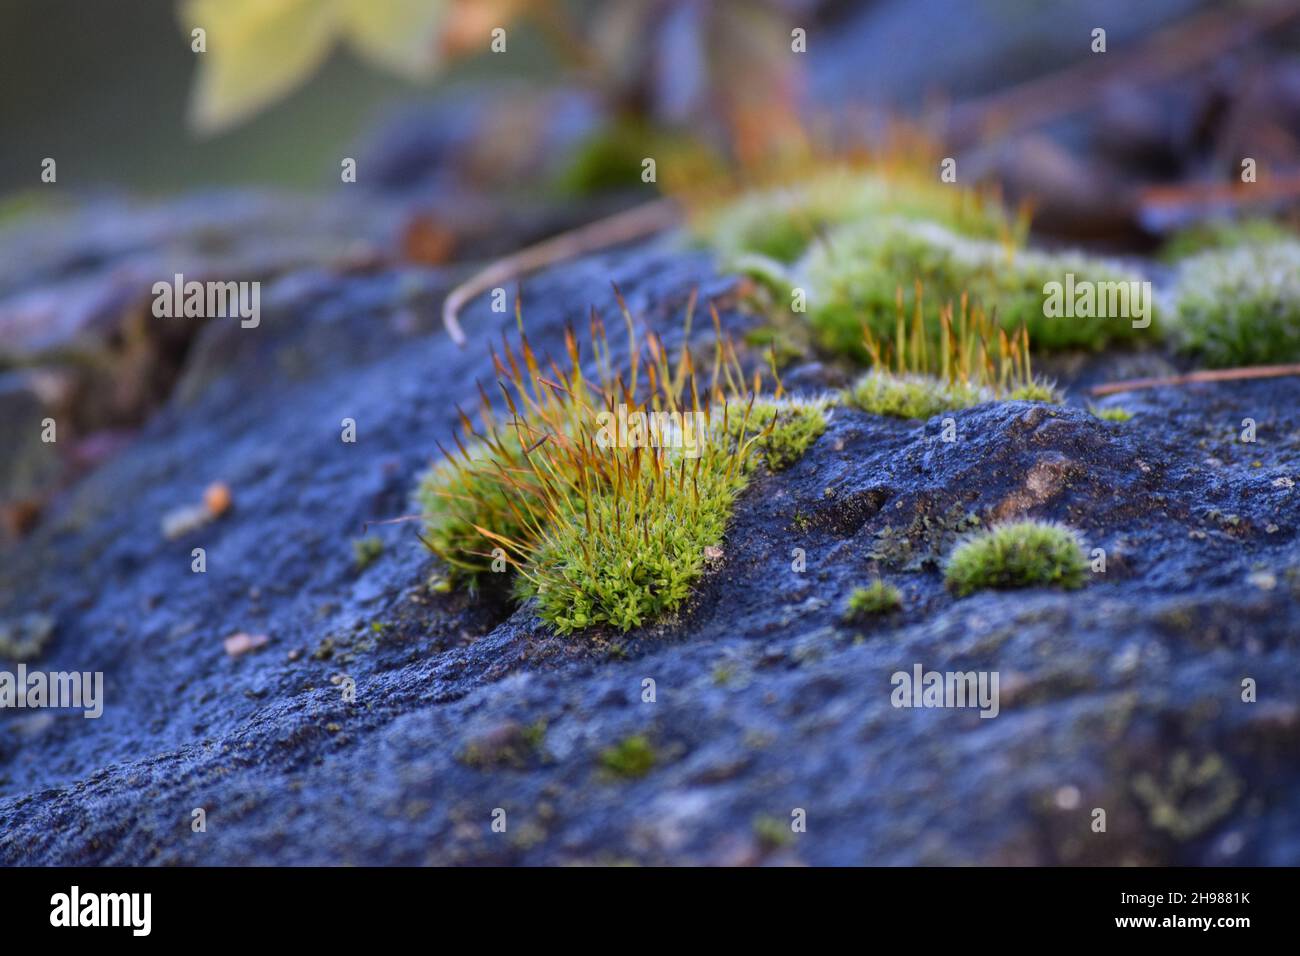 Moss blooming on a Stone Stock Photo